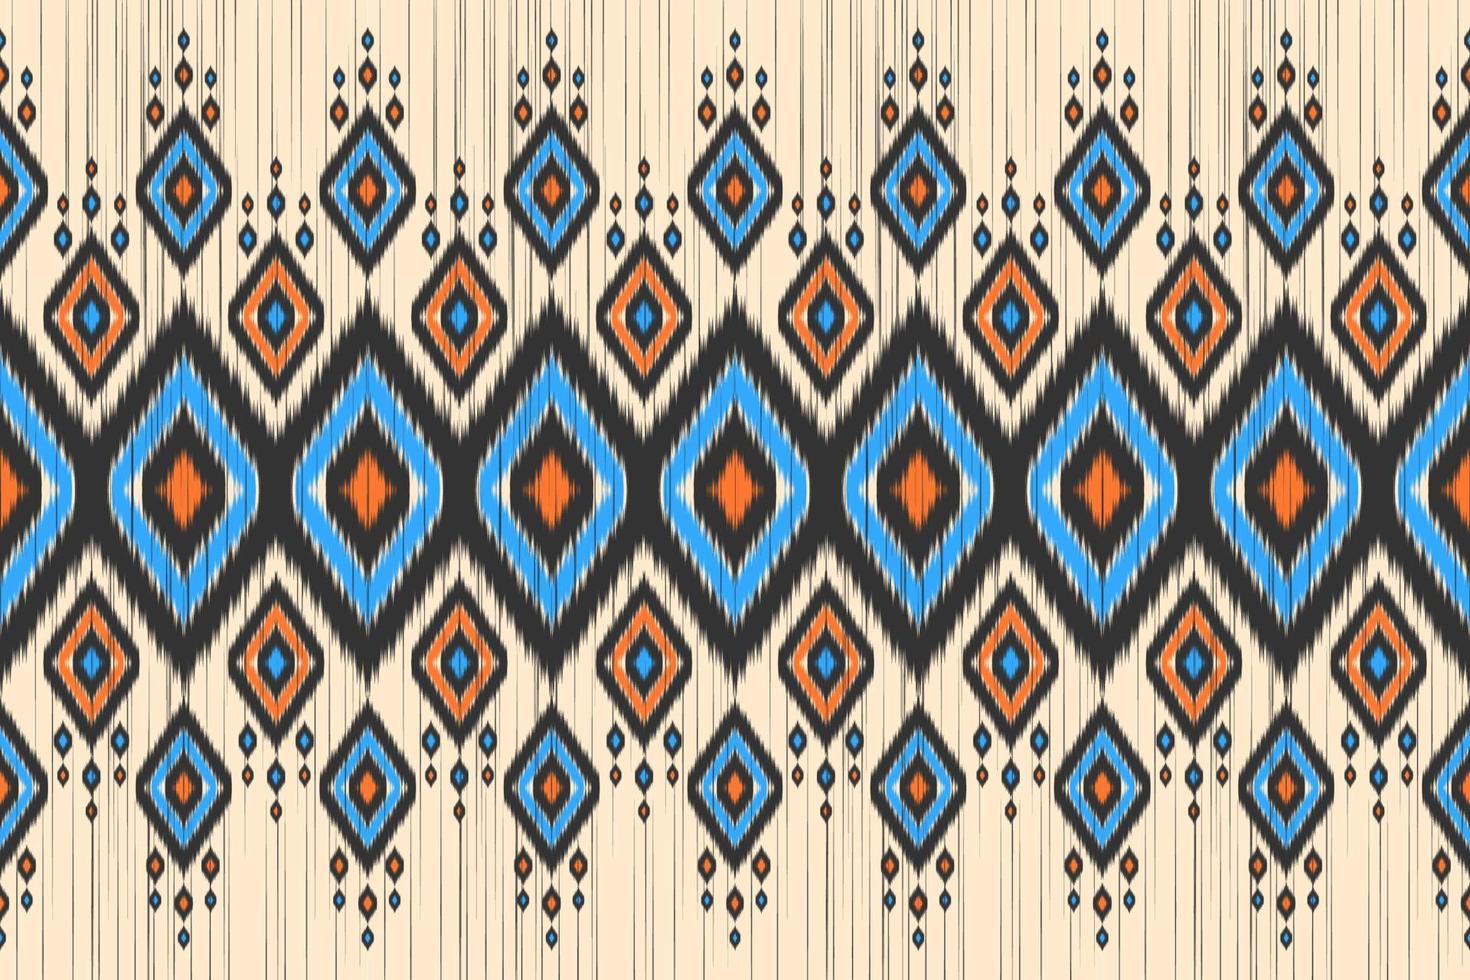 Carpet Mexican style. Ethnic ikat seamless pattern in tribal. Aztec geometric ornament print. vector